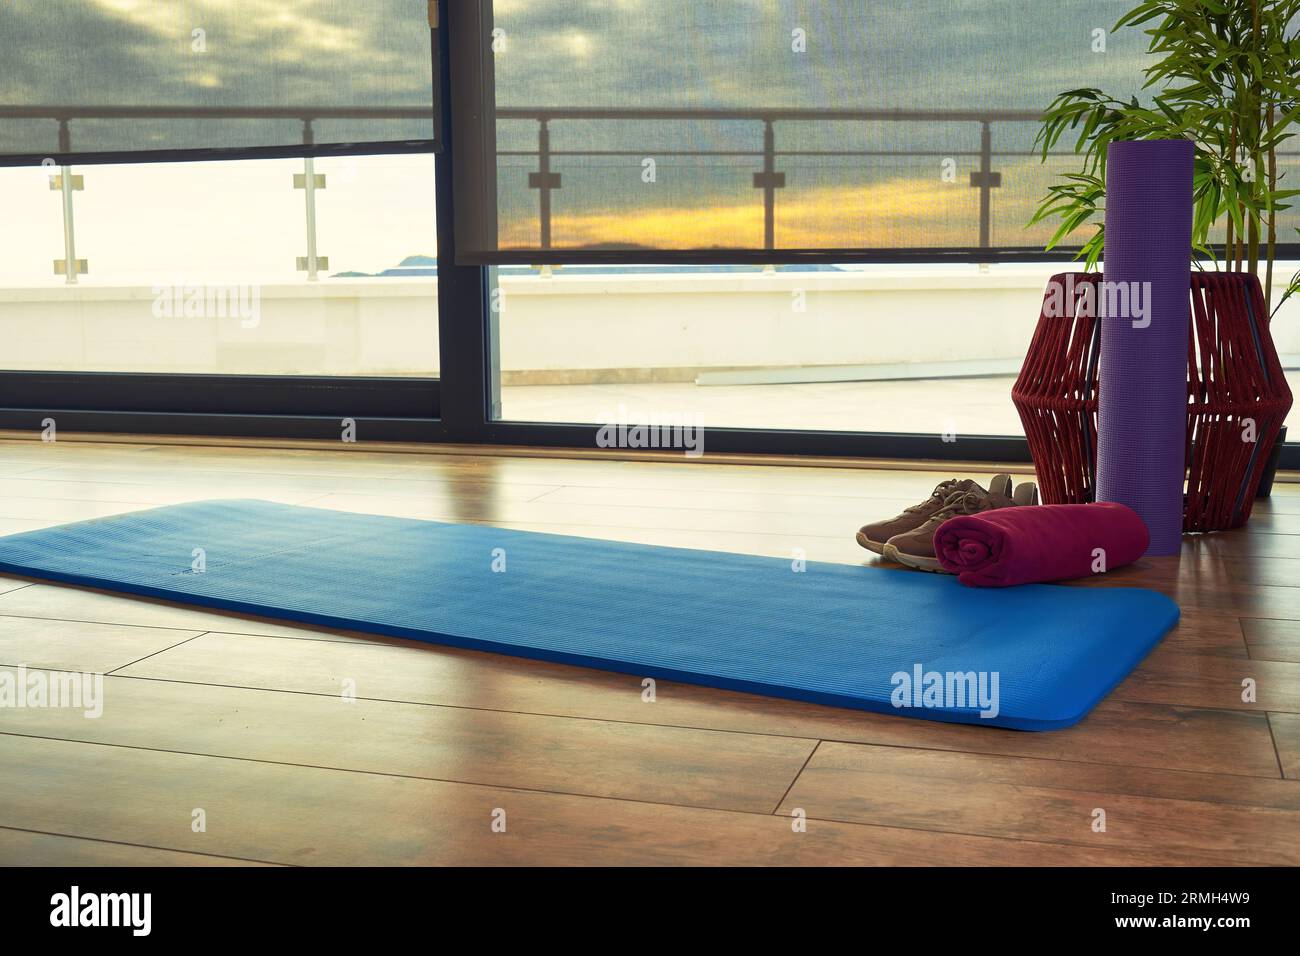 Sunlit fitness room on the top floor of the building with a sunset light. Shoes, mat, roller and belts with towel on the floor ready for raining Stock Photo